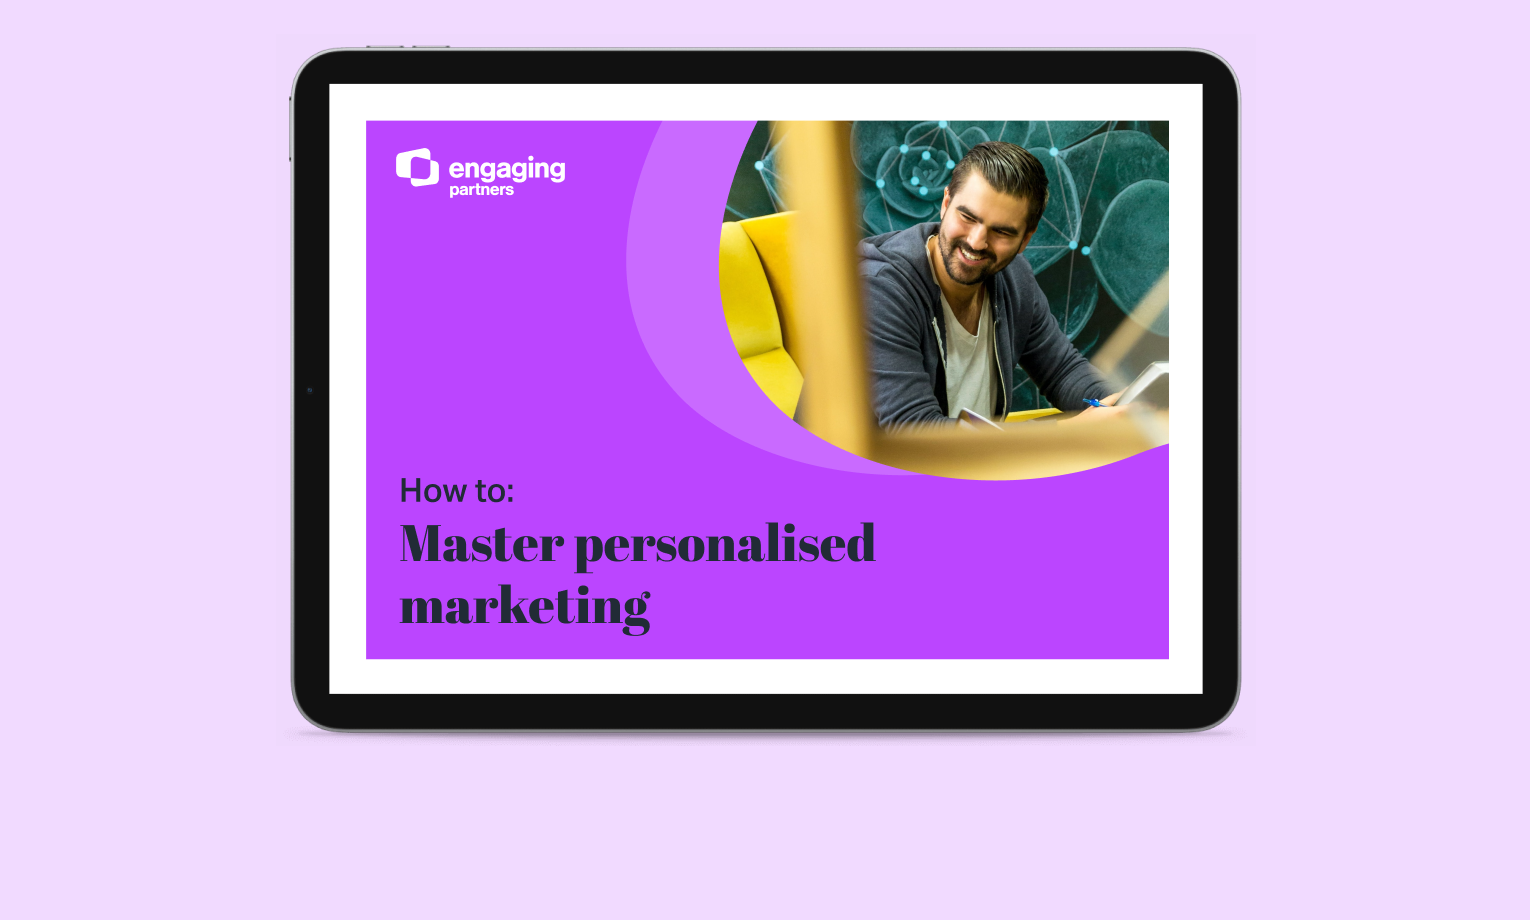 Master personalised marketing guide